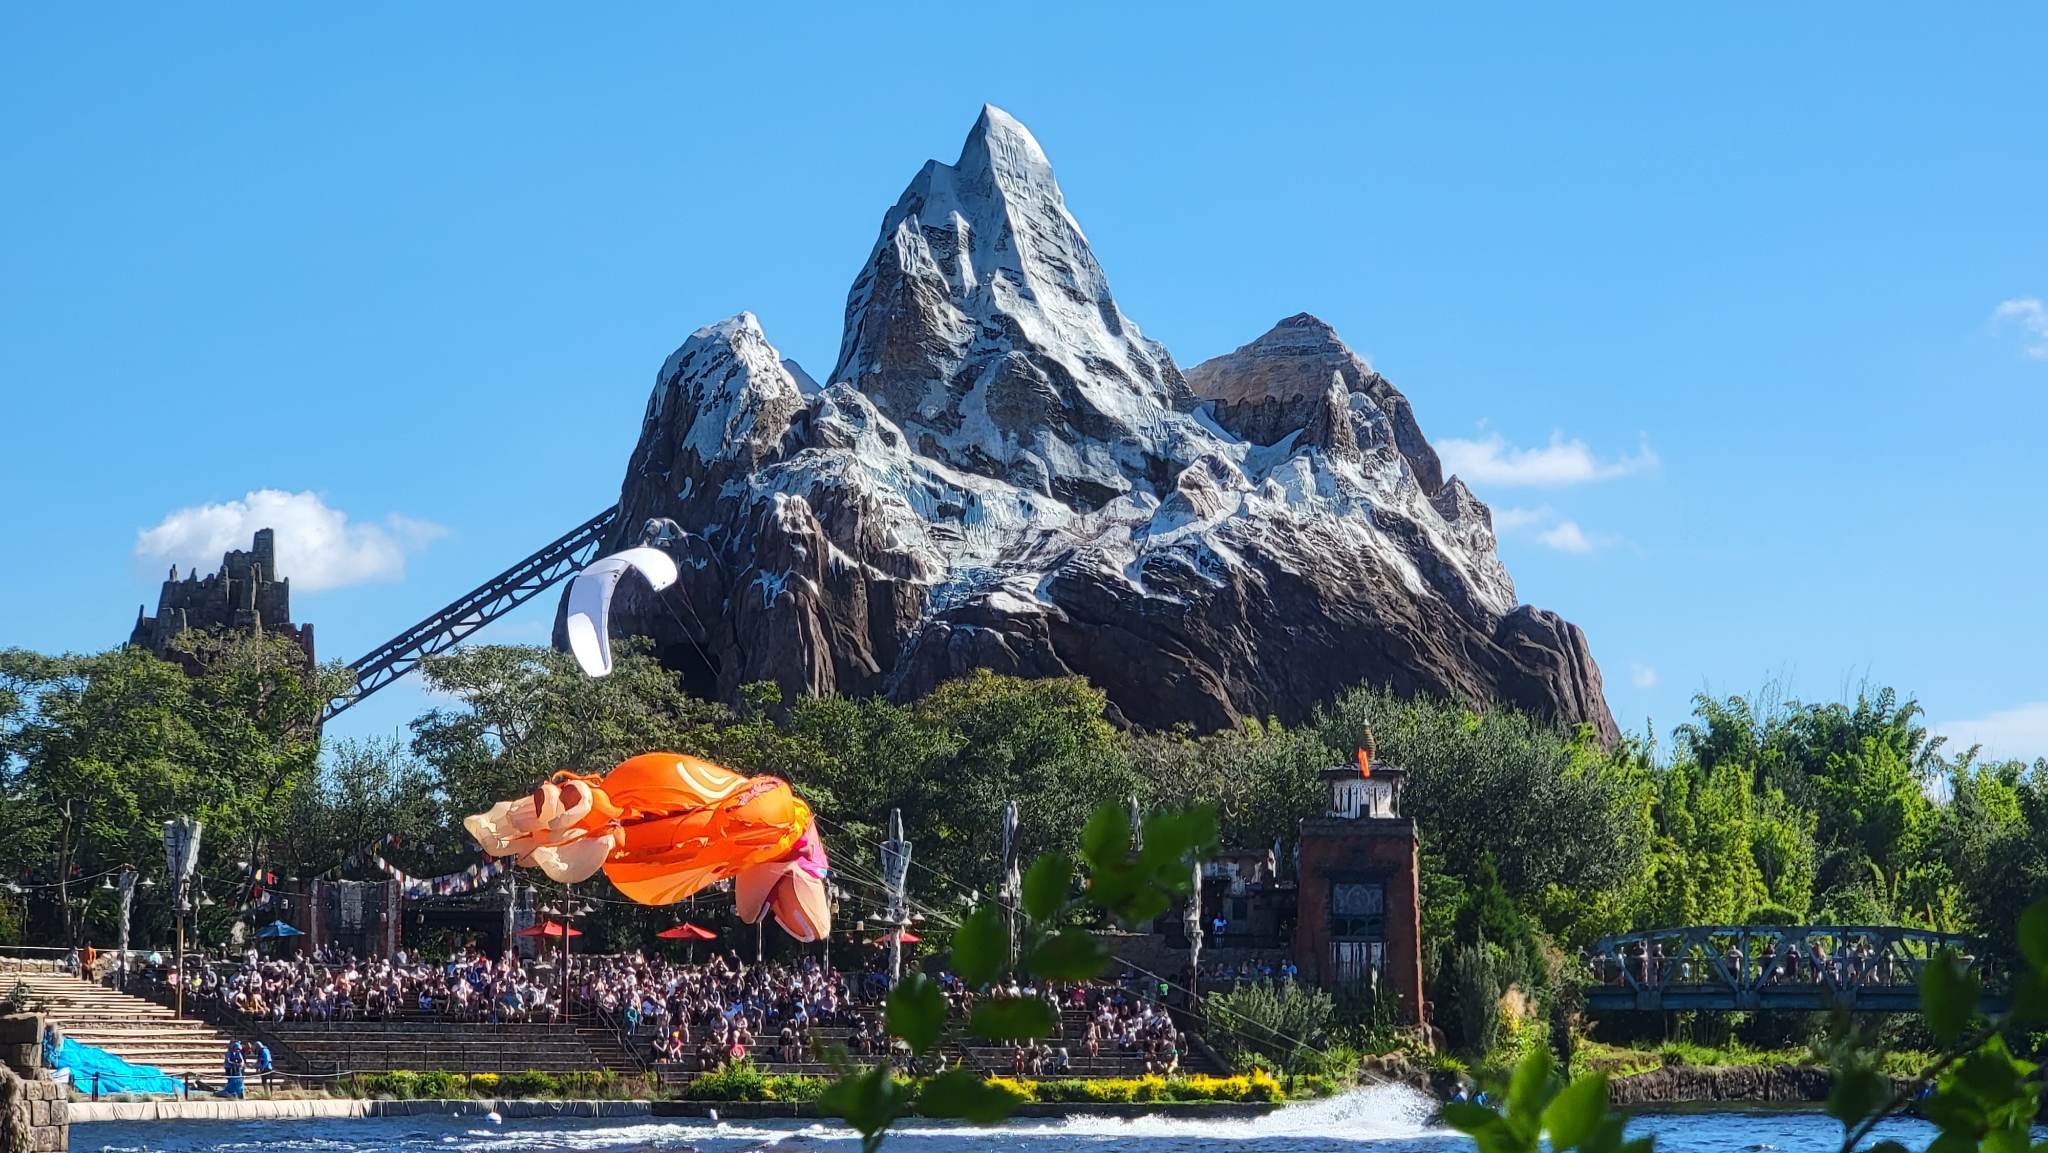 Conquer the Legendary Expedition: Experience Everest at Disney’s Animal Kingdom